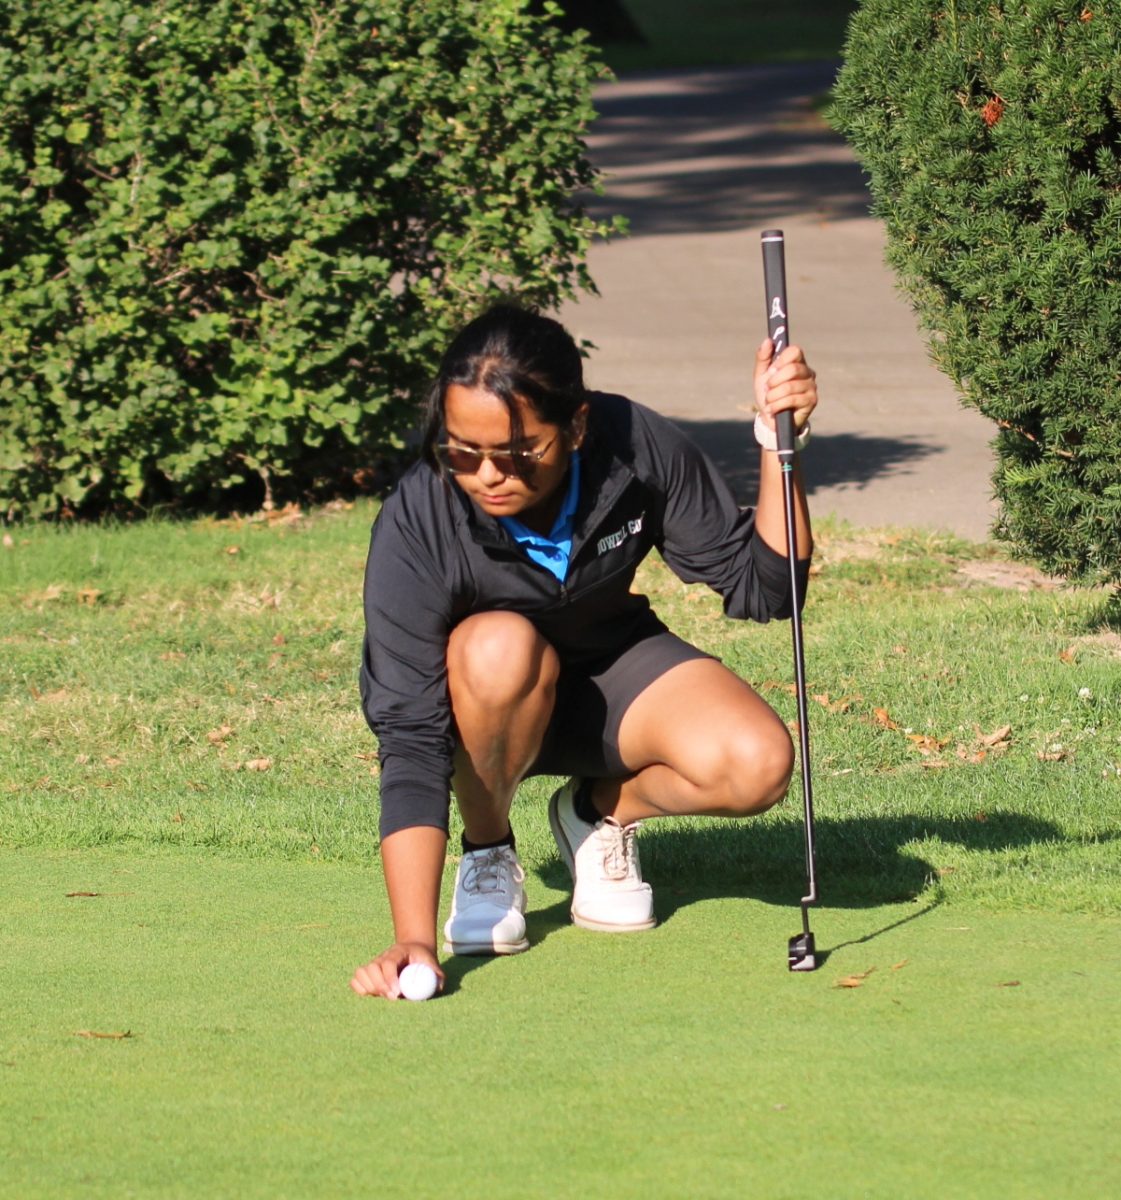 Freshman+Dhaara+Ponnapati+prepares+herself+for+her+shot+at+the+Riverside+Tournament+against+Cor+Jesu+and+Jackson%2C+Sept.+14.+Ponnapati+placed+first+in+the+individual+standings+with+77+points.